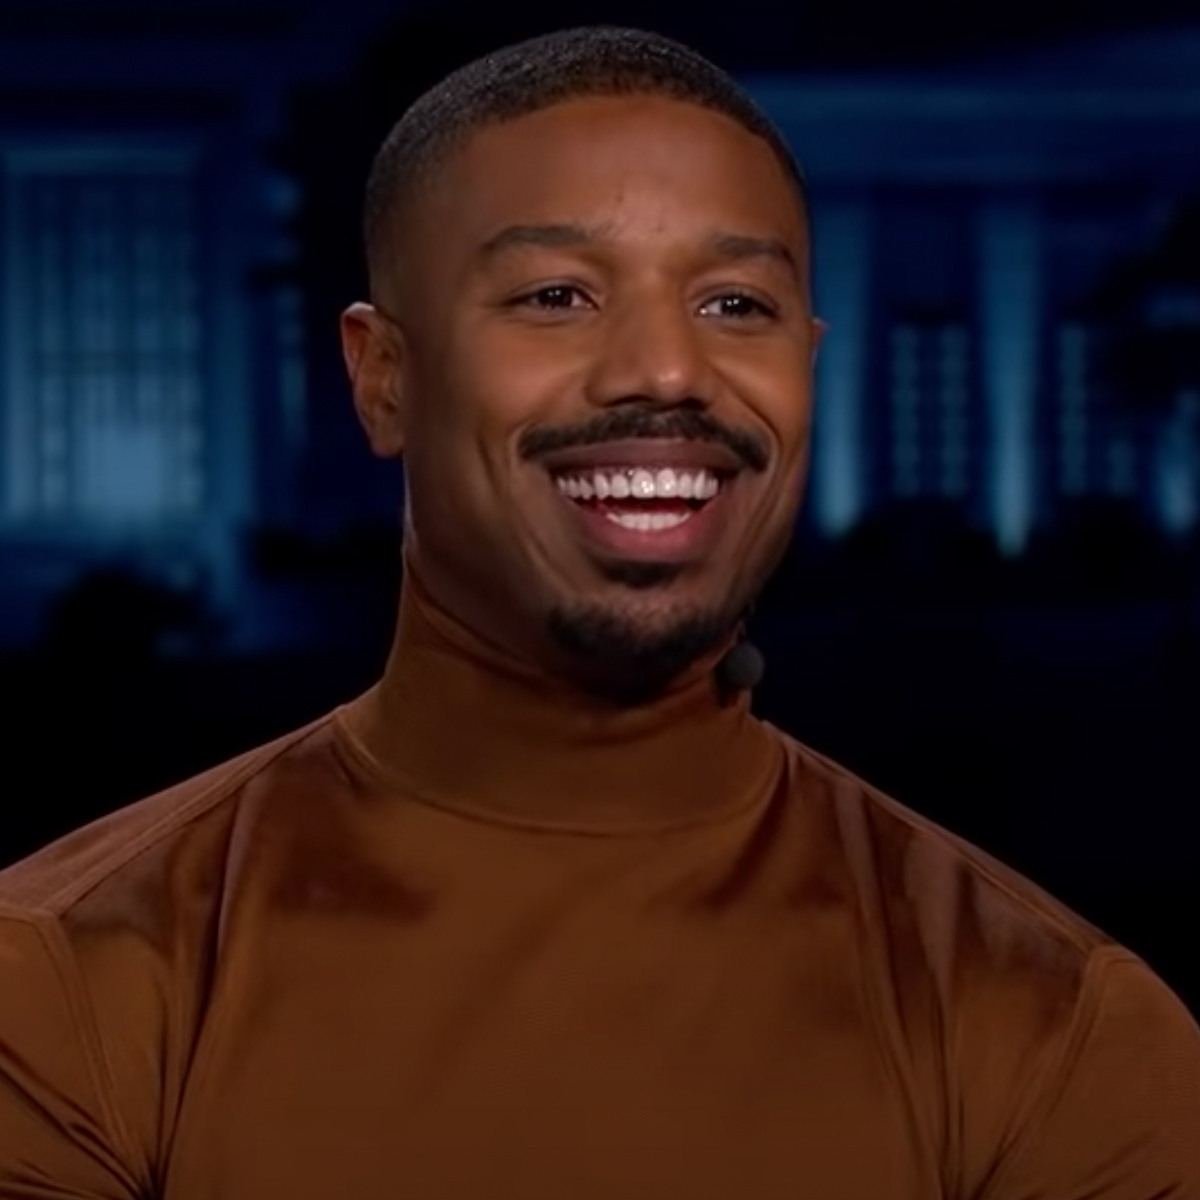 IN PHOTOS: 8 times Michael B. Jordan proved why he is the sexiest man alive  (even with clothes on) – Garage